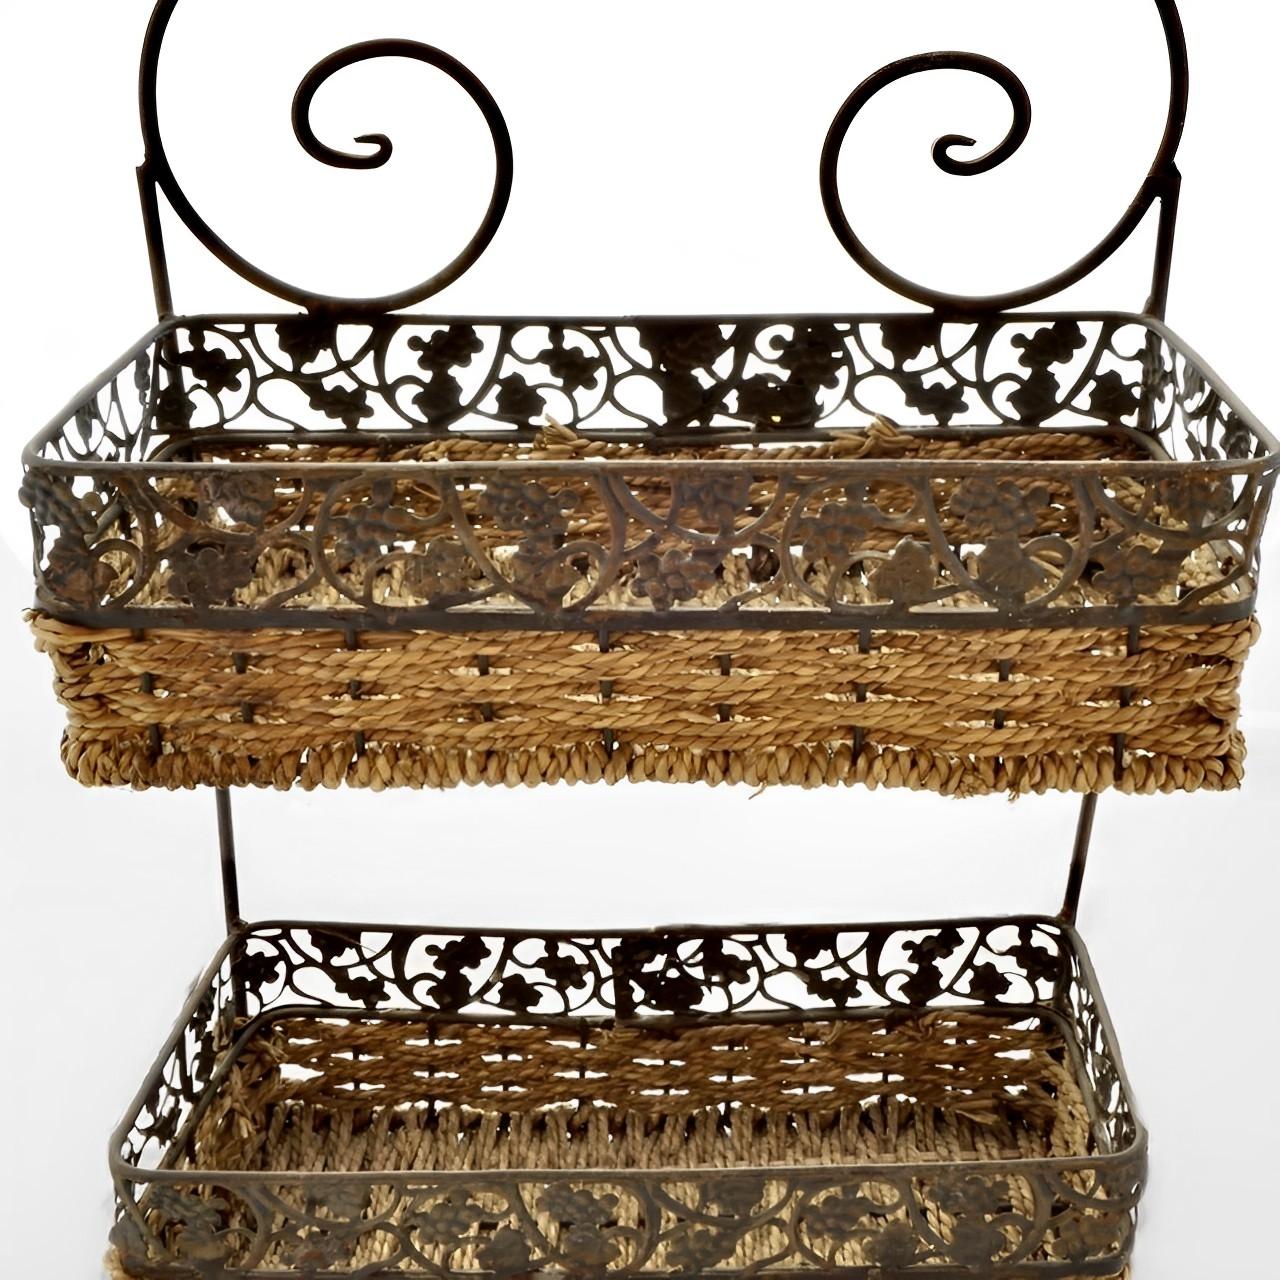 
Lovely two shelf woven and metal grape design wall hanging unit. The woven material is possibly seagrass. The unit is probably French. There is some rust to the metalwork. Measuring height 49.3 cm / 19.4 inches by width 26.9 cm / 10.6 inches, and